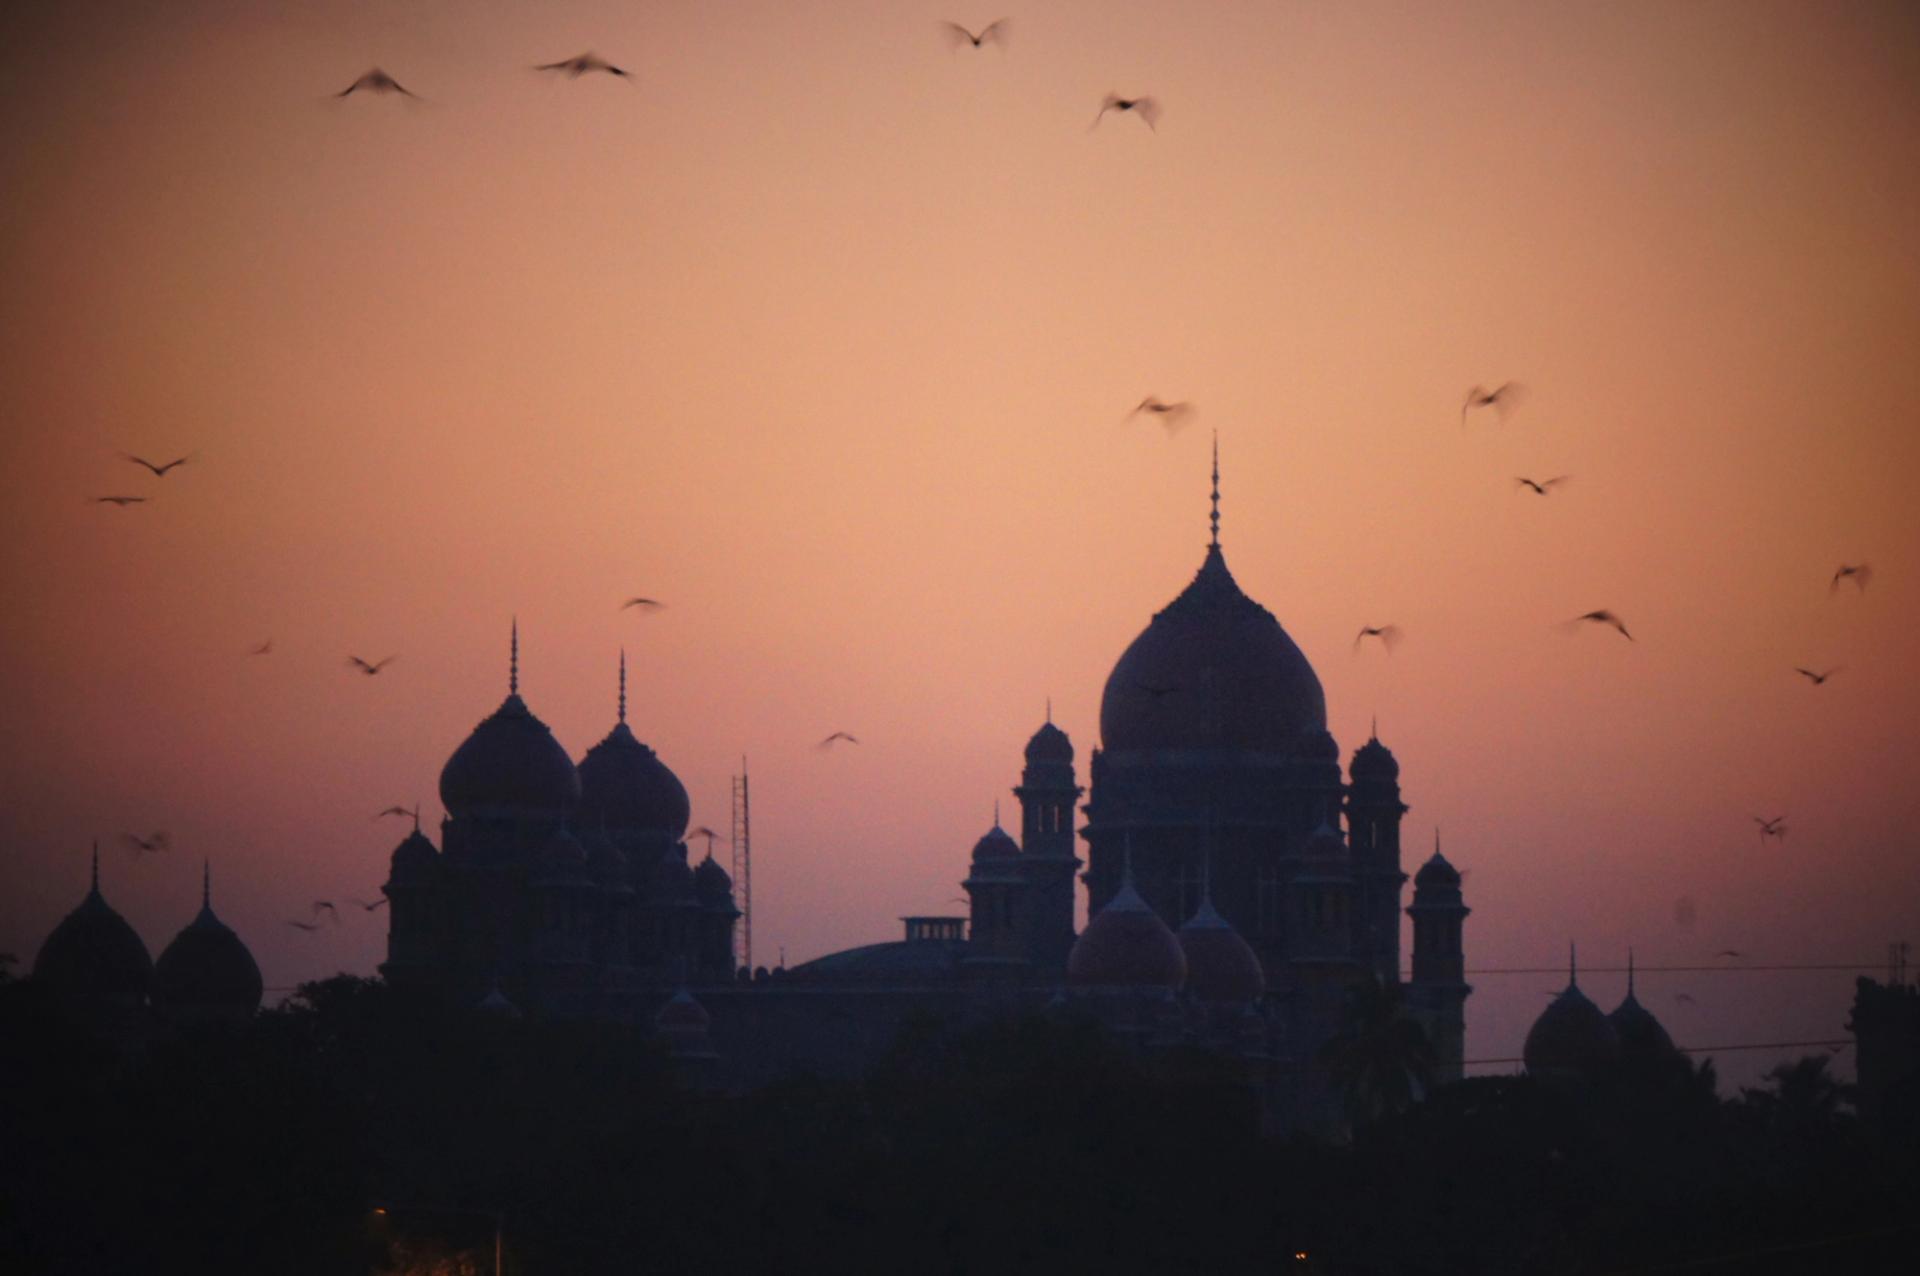 The minarets of Hyderabad High Court, India, in silhouette at dusk. 